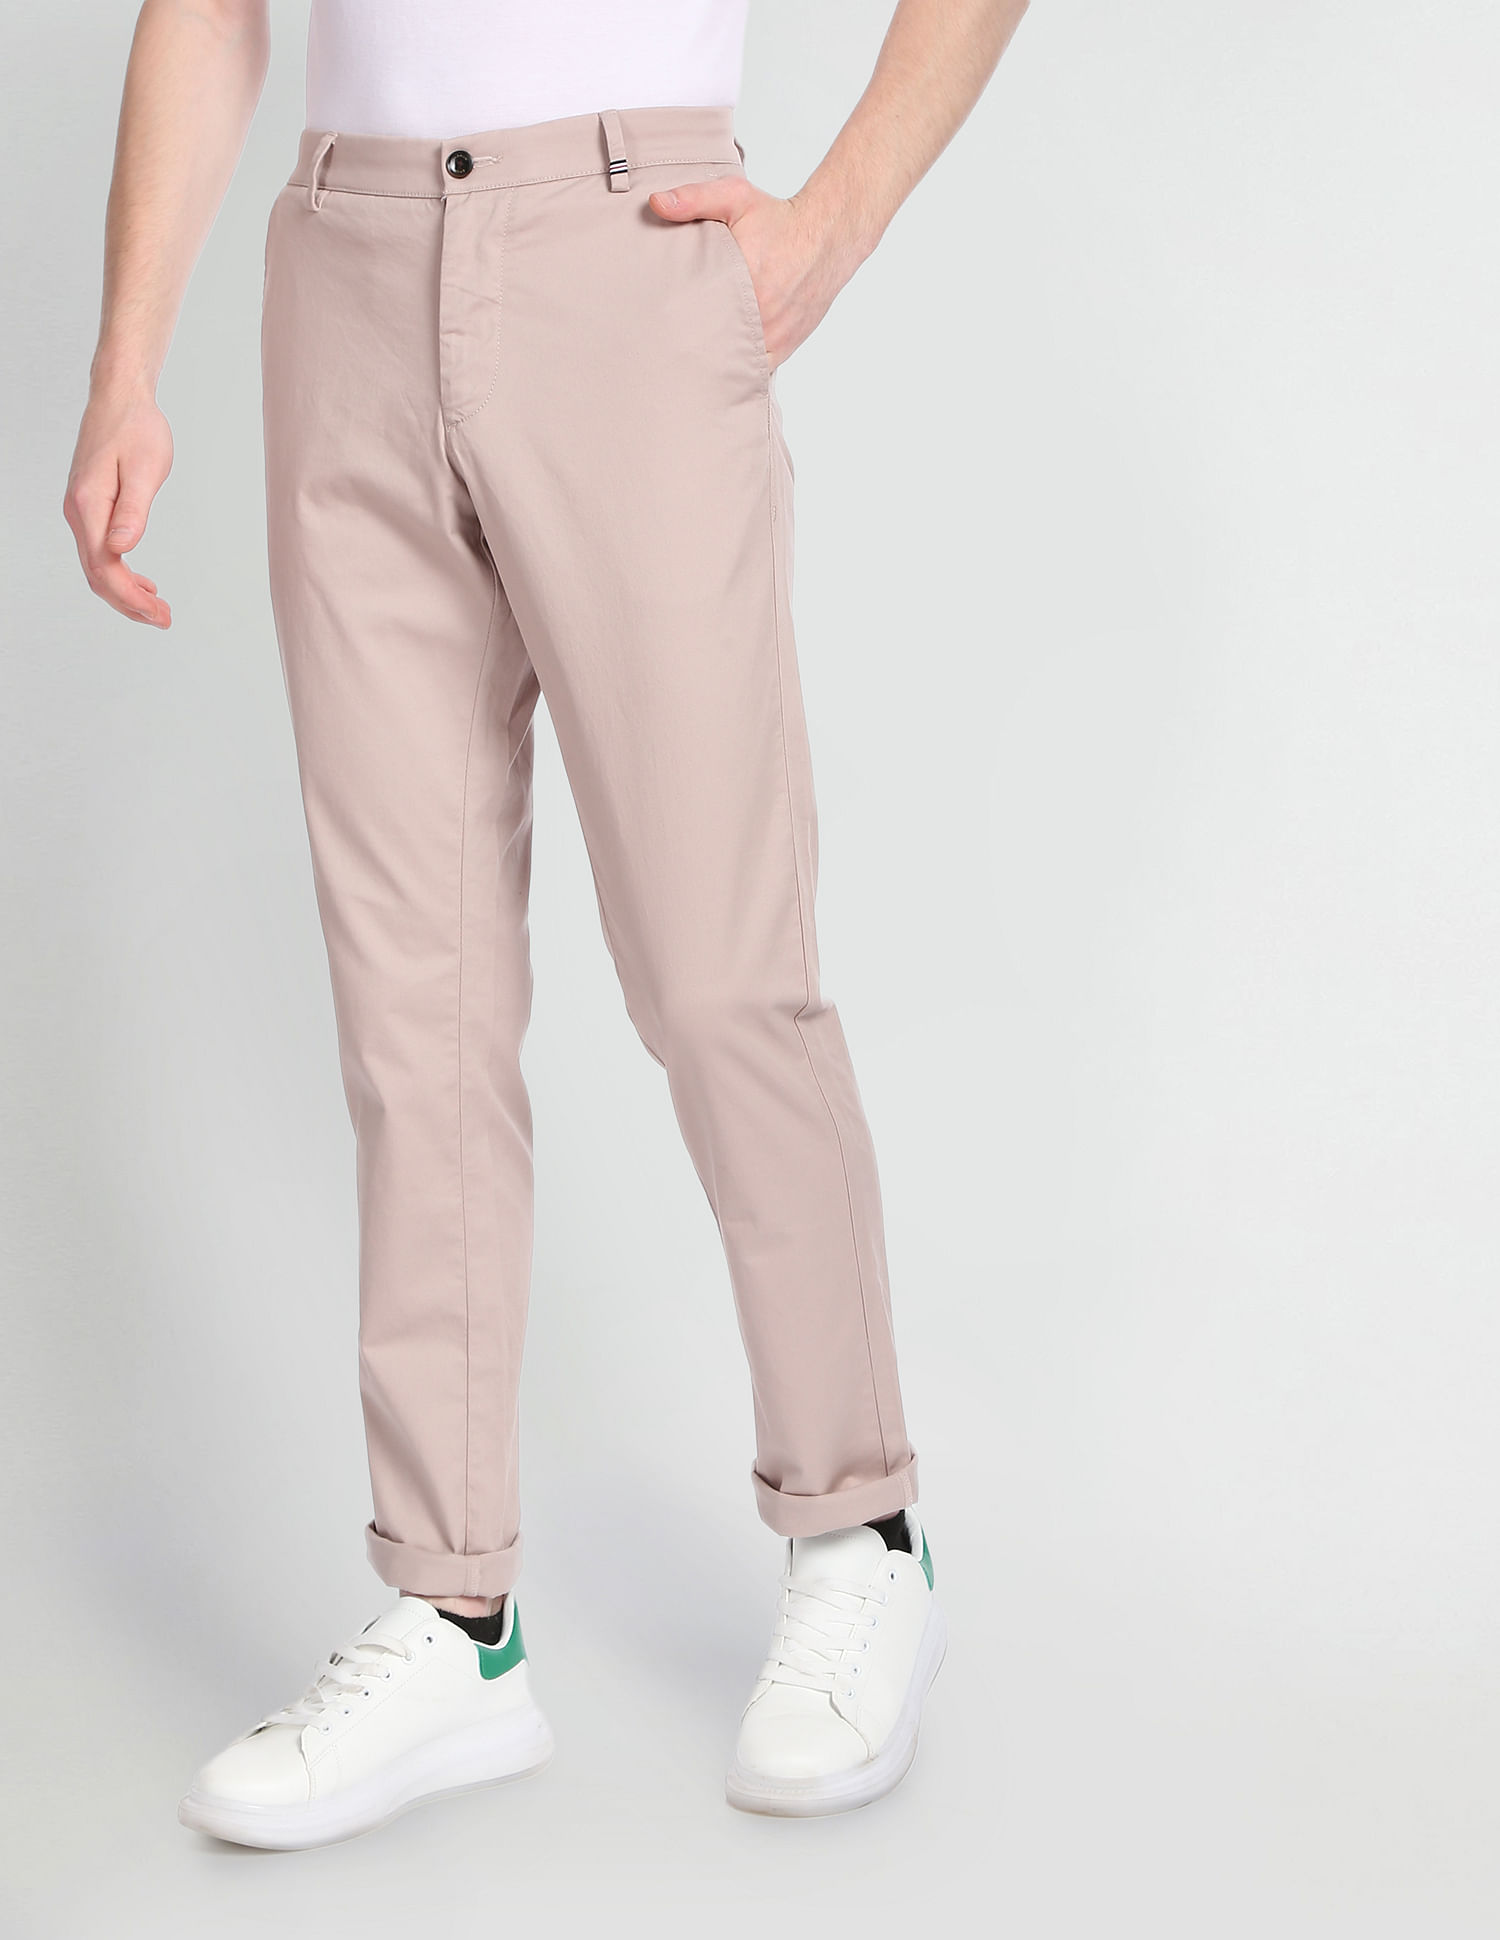 Buy Arrow Sports Low Rise Slim Fit Casual Trousers - NNNOW.com